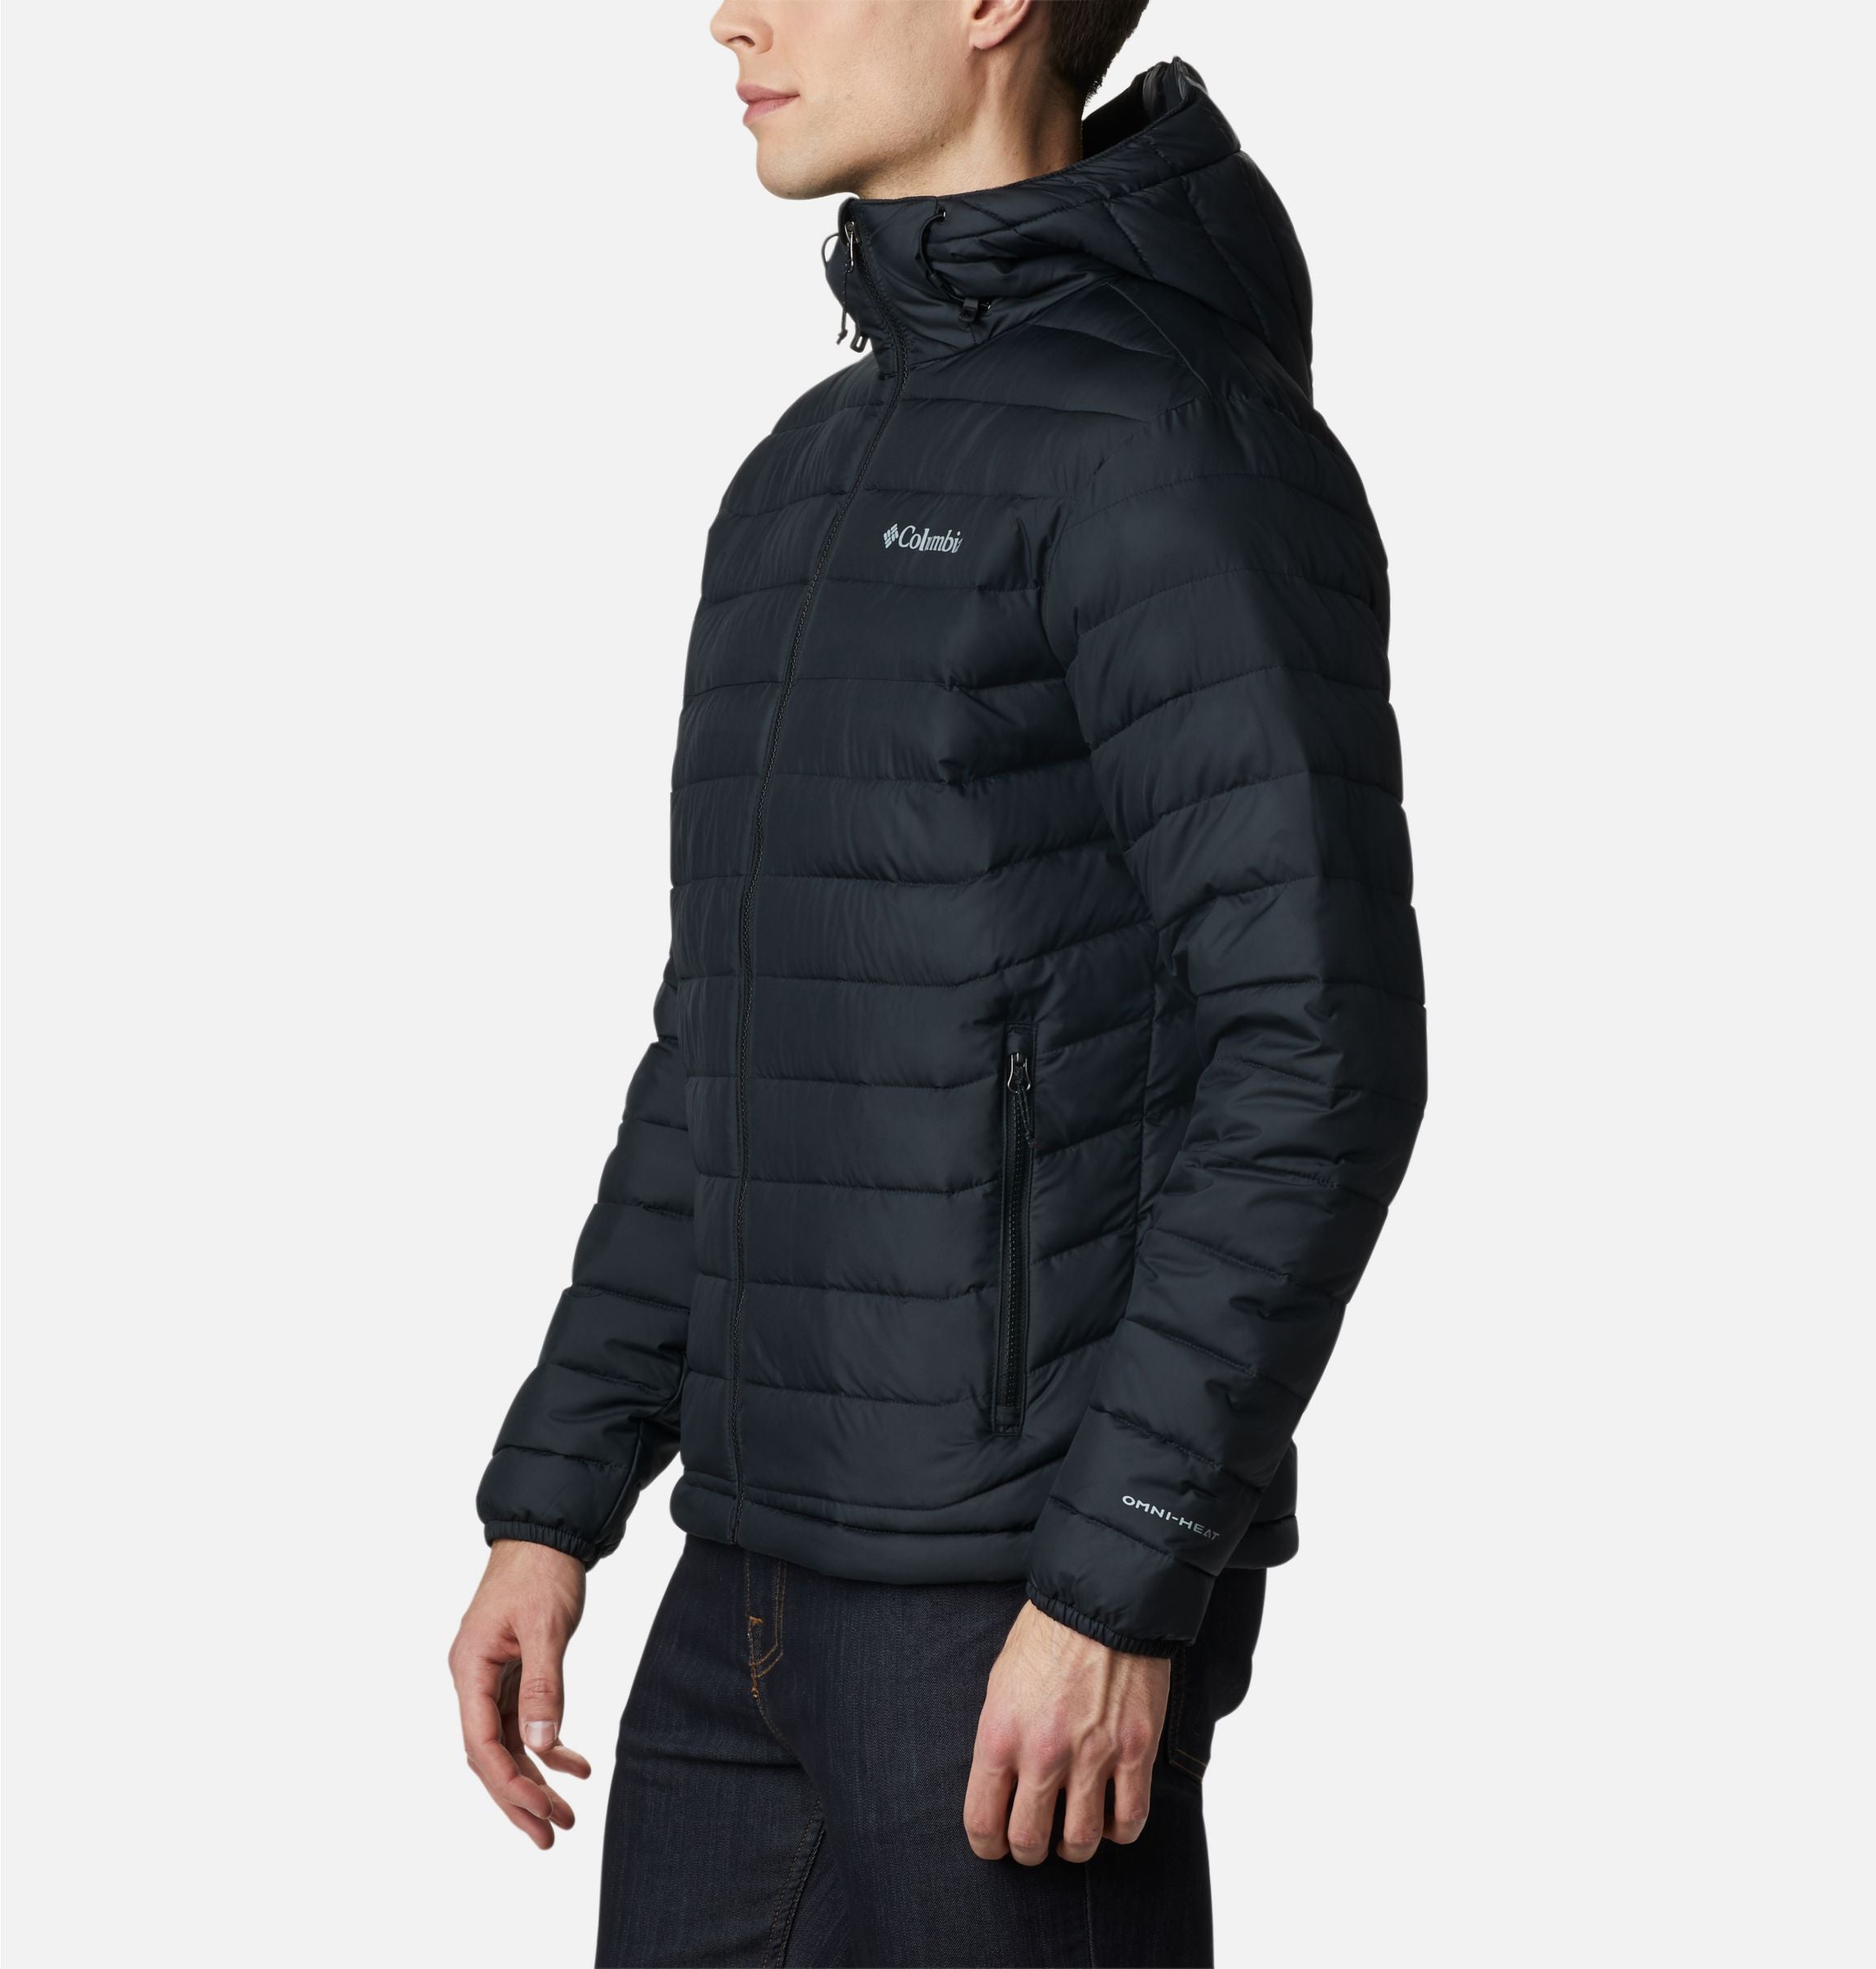 Columbia POWDER LITE HOODED JACKET Black - Fast delivery